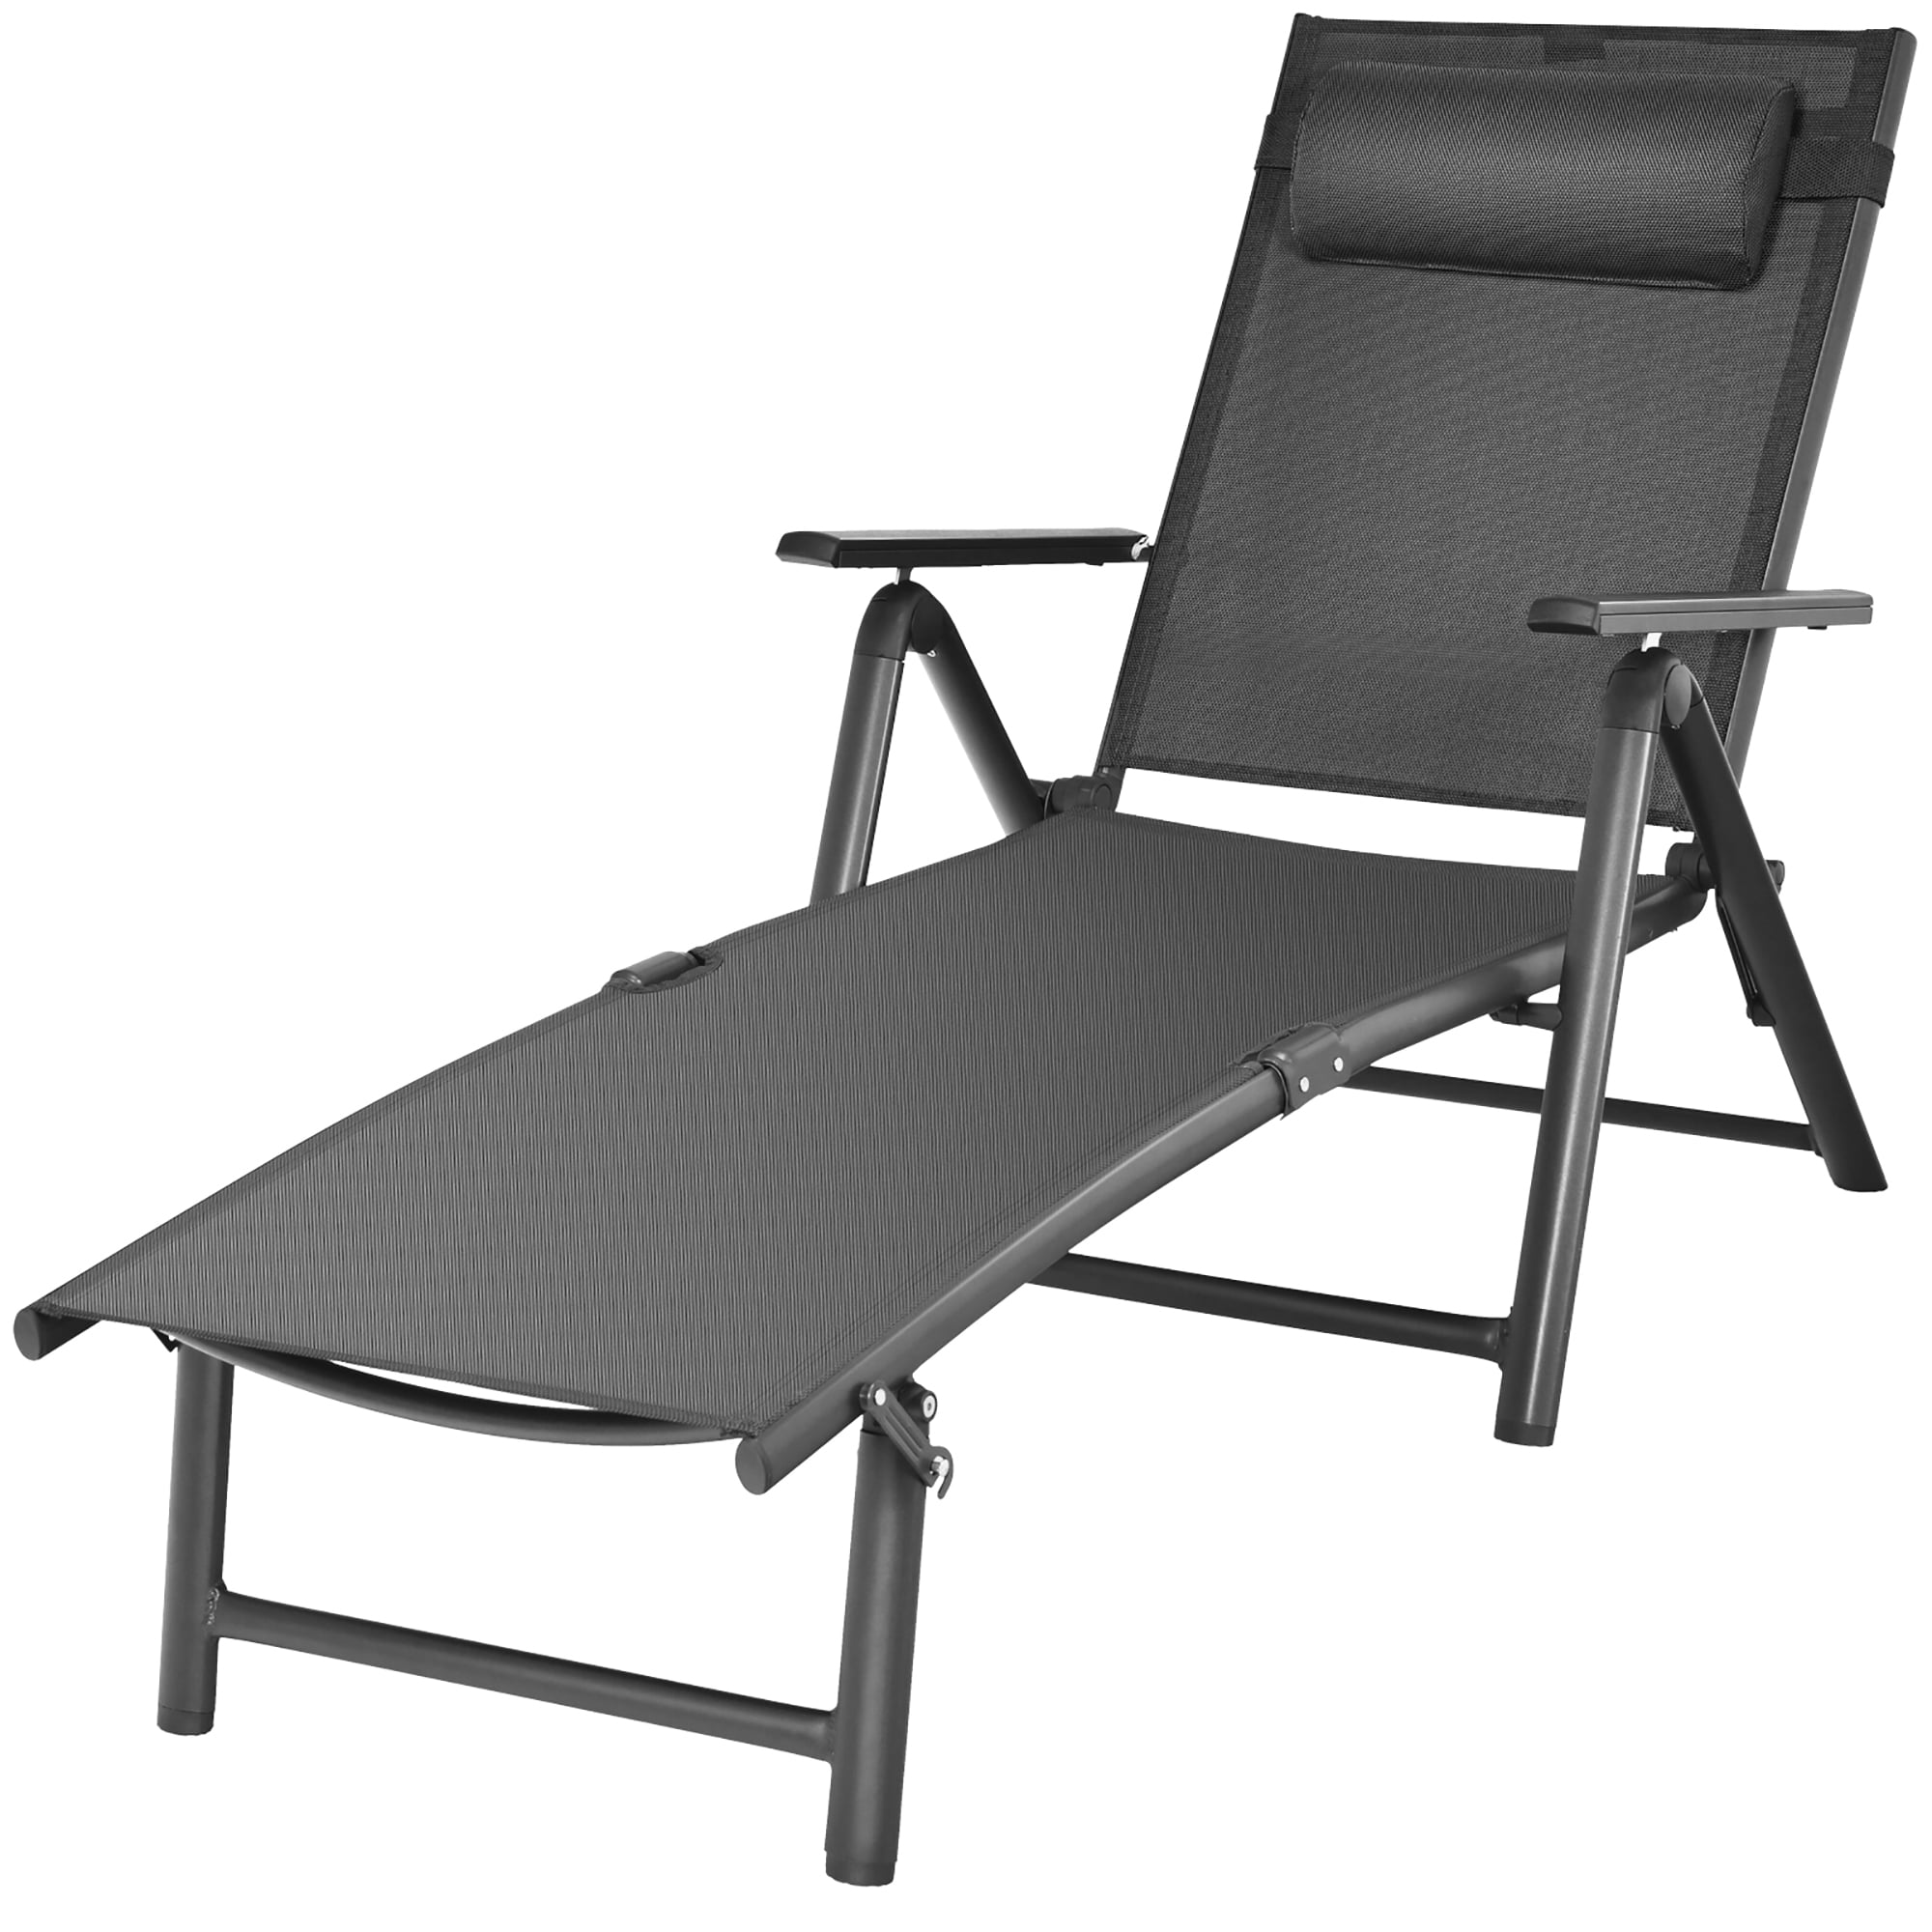 Goplus Costway Casual Black Chaise Lounge in the Chaise Lounges